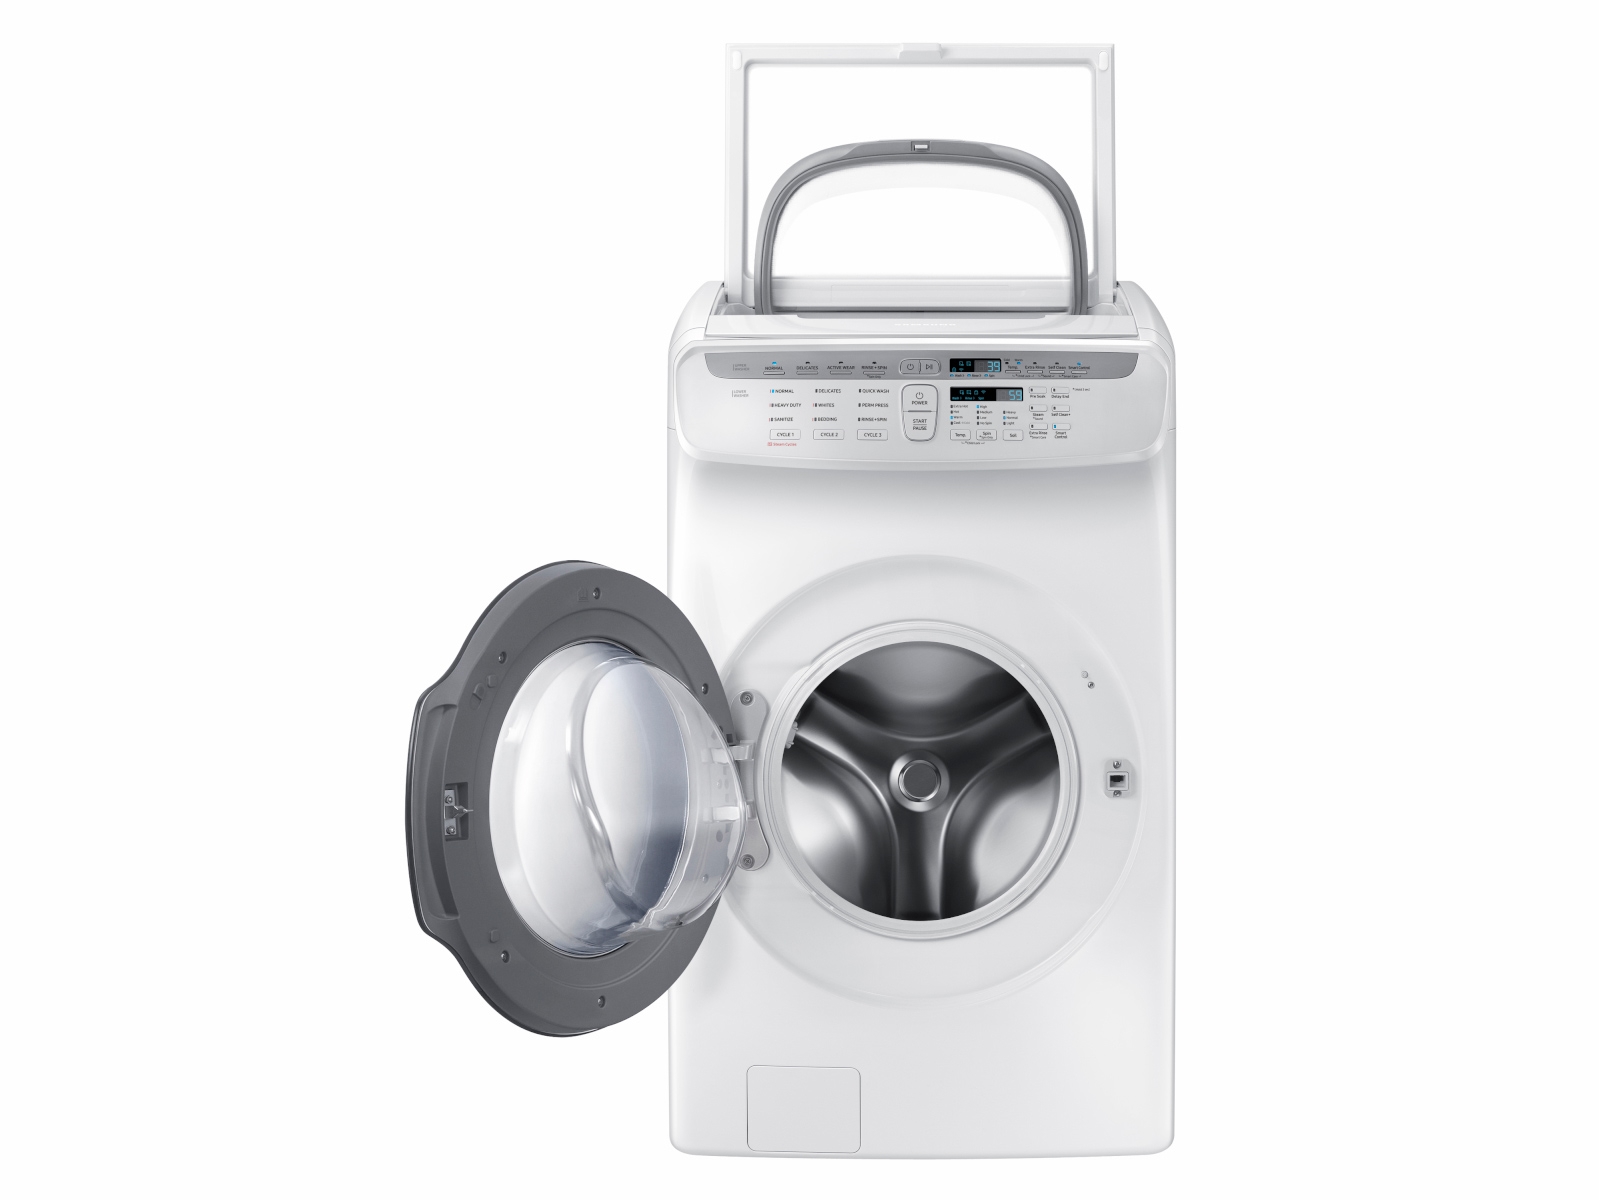 https://image-us.samsung.com/SamsungUS/home/home-appliances/washers/2-in-1/pd/wv55m9600aw/gallery/03_Washer-FlexWash_WV55M9600AW_Front_Open_White.jpg?$product-details-jpg$